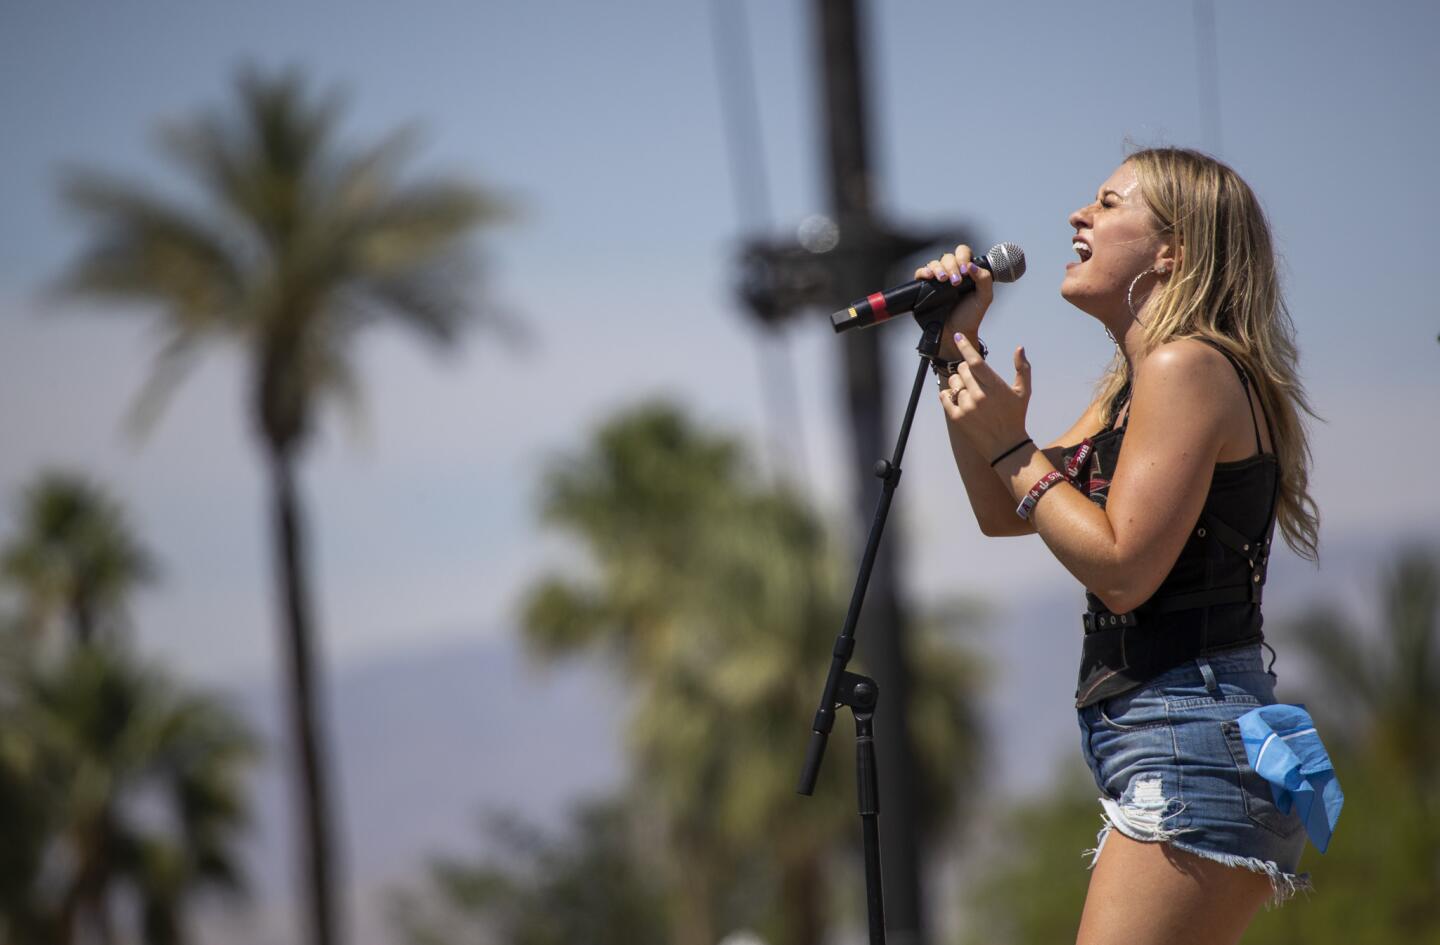 Rachel Wammack performs on the Sirius XM Spotlight Stage on the second of the three-day 2019 Stagecoach Country Music Festival, the world's biggest country music festival, at the Empire Polo Fields in Indio, Calif., on April 27, 2019. Stagecoach fans have the chance to watch some 75 performers and DJs over three days.